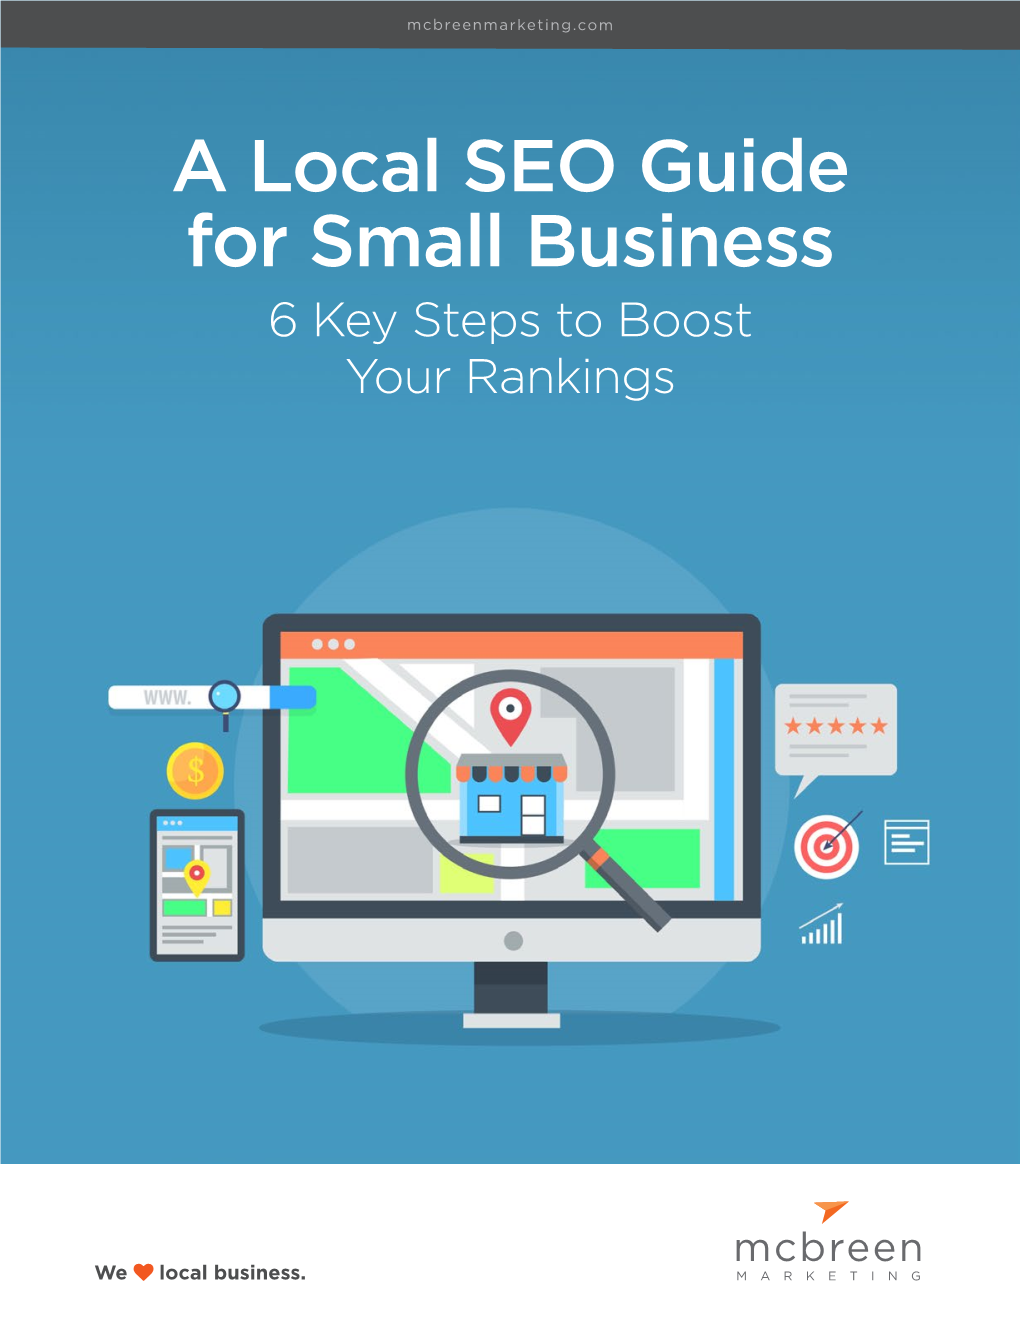 A Local SEO Guide for Small Business 6 Key Steps to Boost Your Rankings